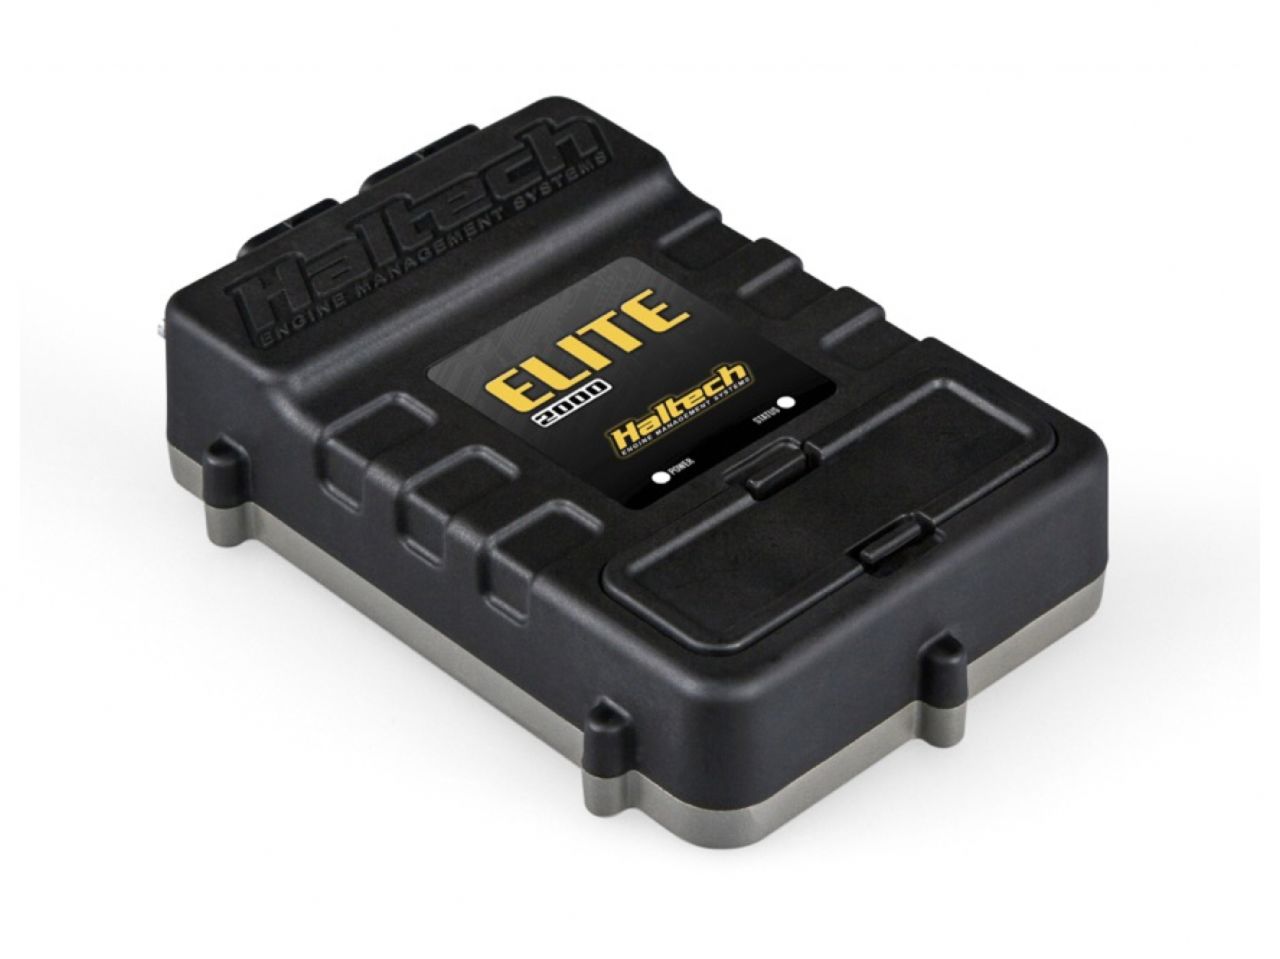 Haltech Elite 2000 ECUOutputs: Up to 8 injector and 8 ignition.Suits:Universal